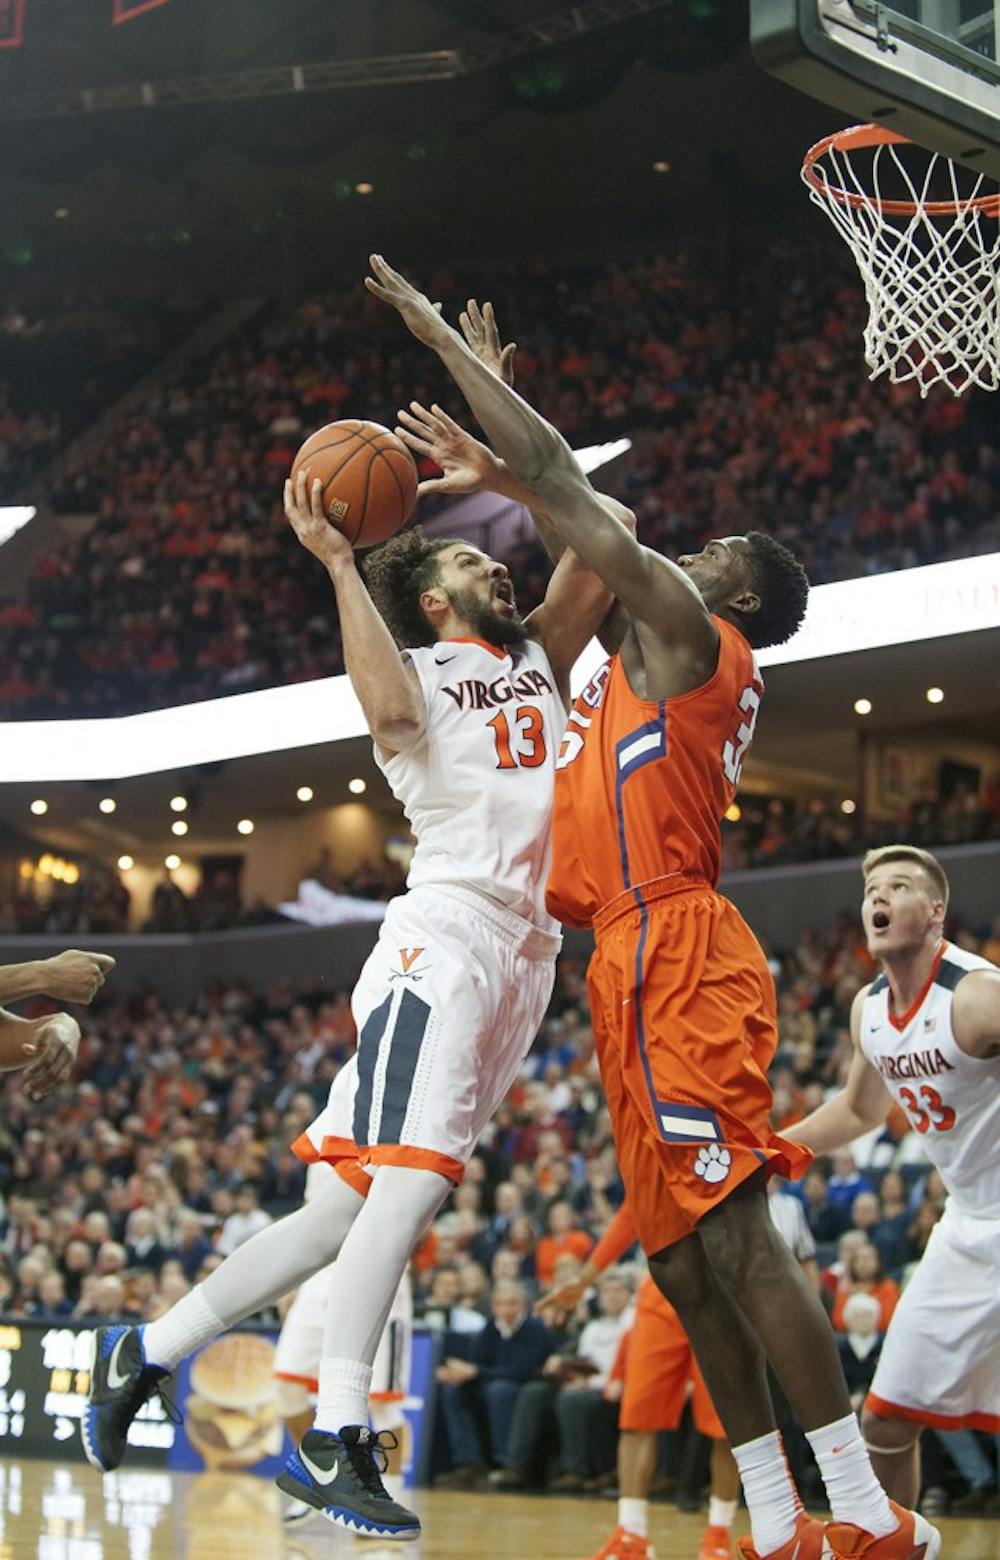 <p>Senior&nbsp;Anthony Gill has been a part of Virginia's success both offensively and defensively, averaging 6 rebounds and 14.9 points per game.</p>